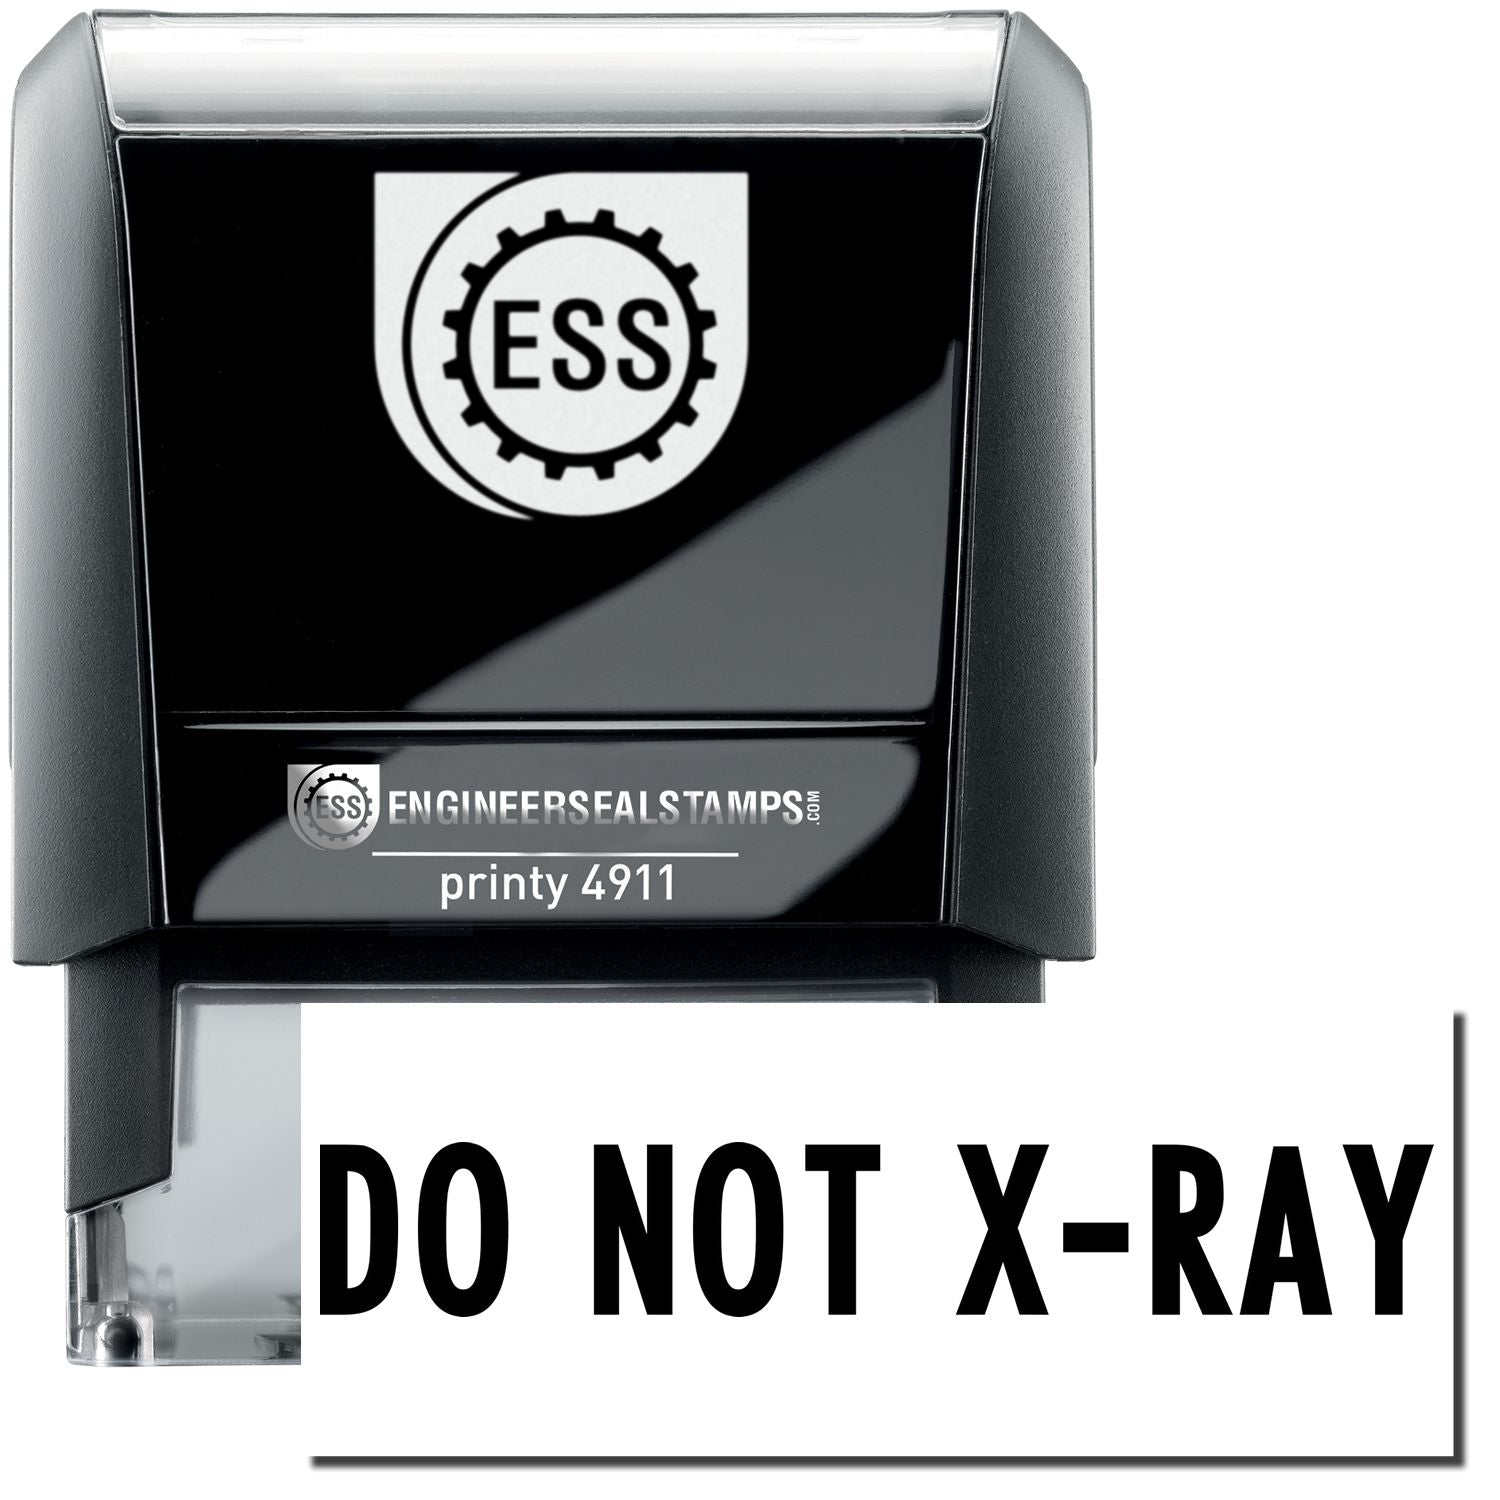 A self-inking stamp with a stamped image showing how the text "DO NOT X-RAY" is displayed after stamping.